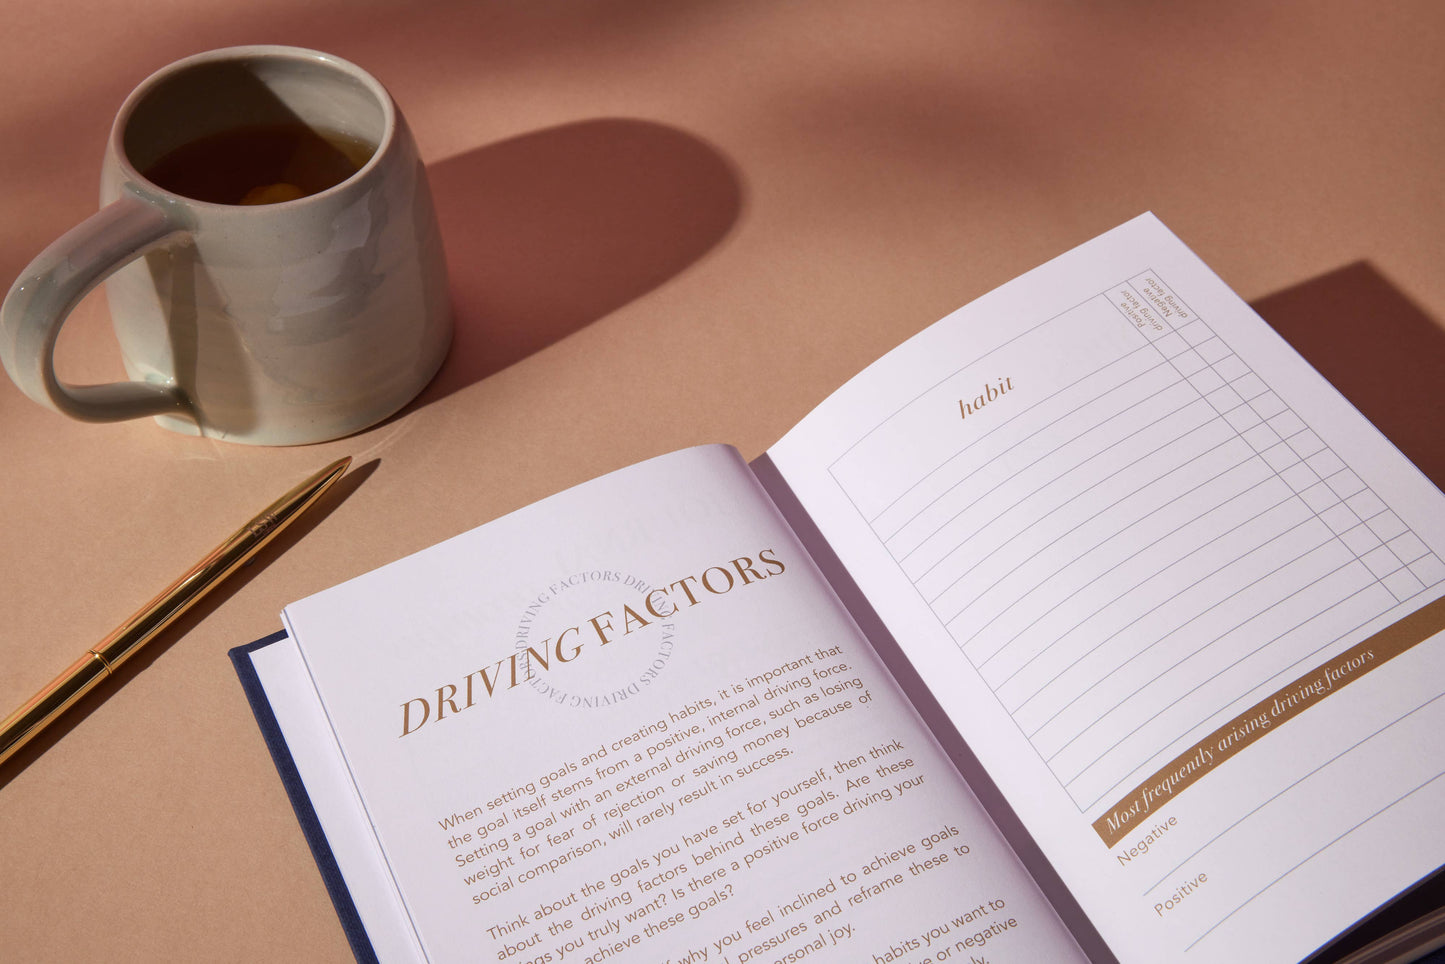 Habit Notes: Daily habit tracking journal | Valentine's gift pre order arriving this week